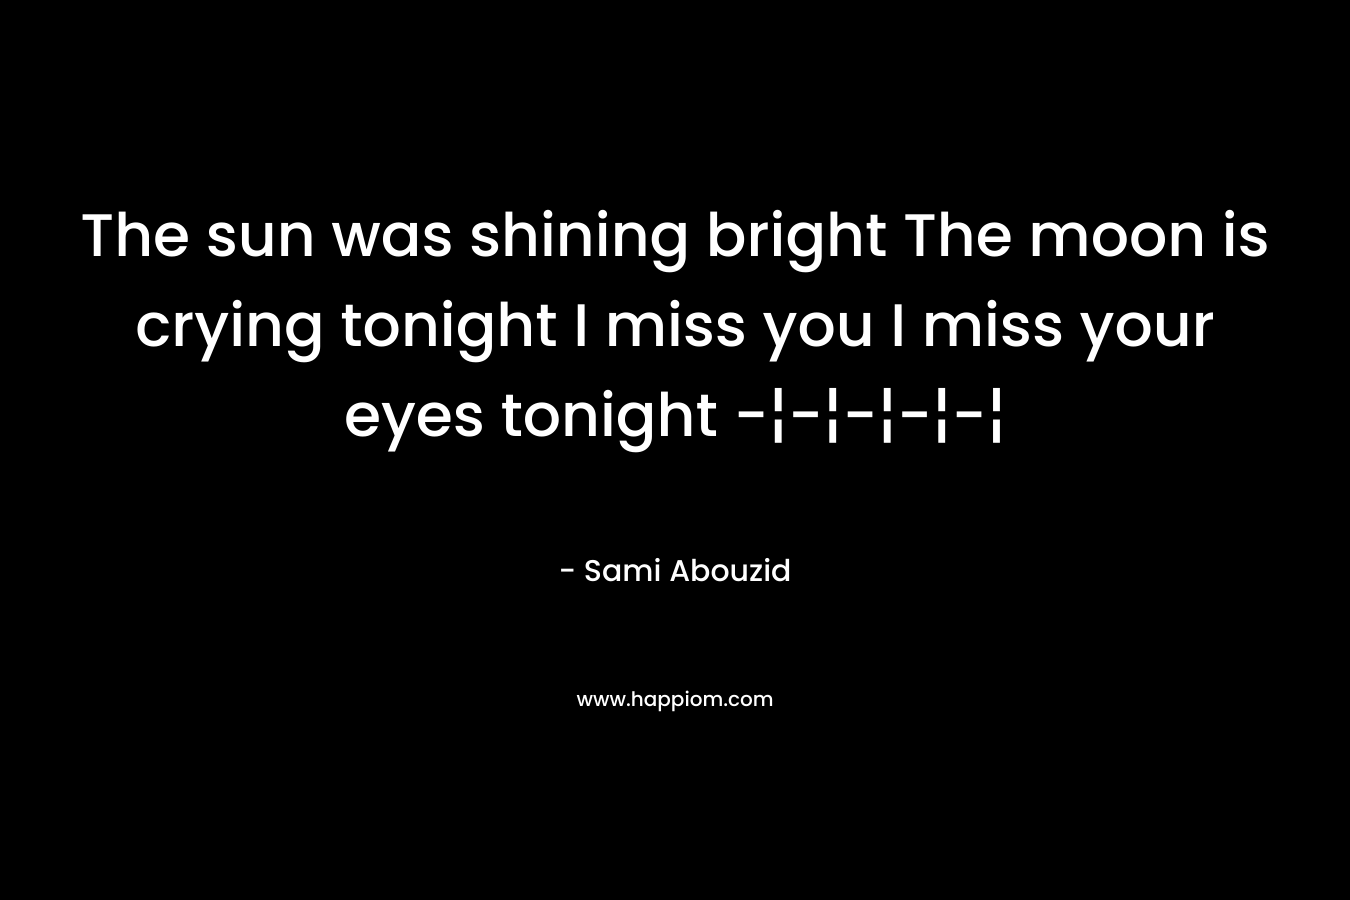 The sun was shining bright The moon is crying tonight I miss you I miss your eyes tonight -¦-¦-¦-¦-¦